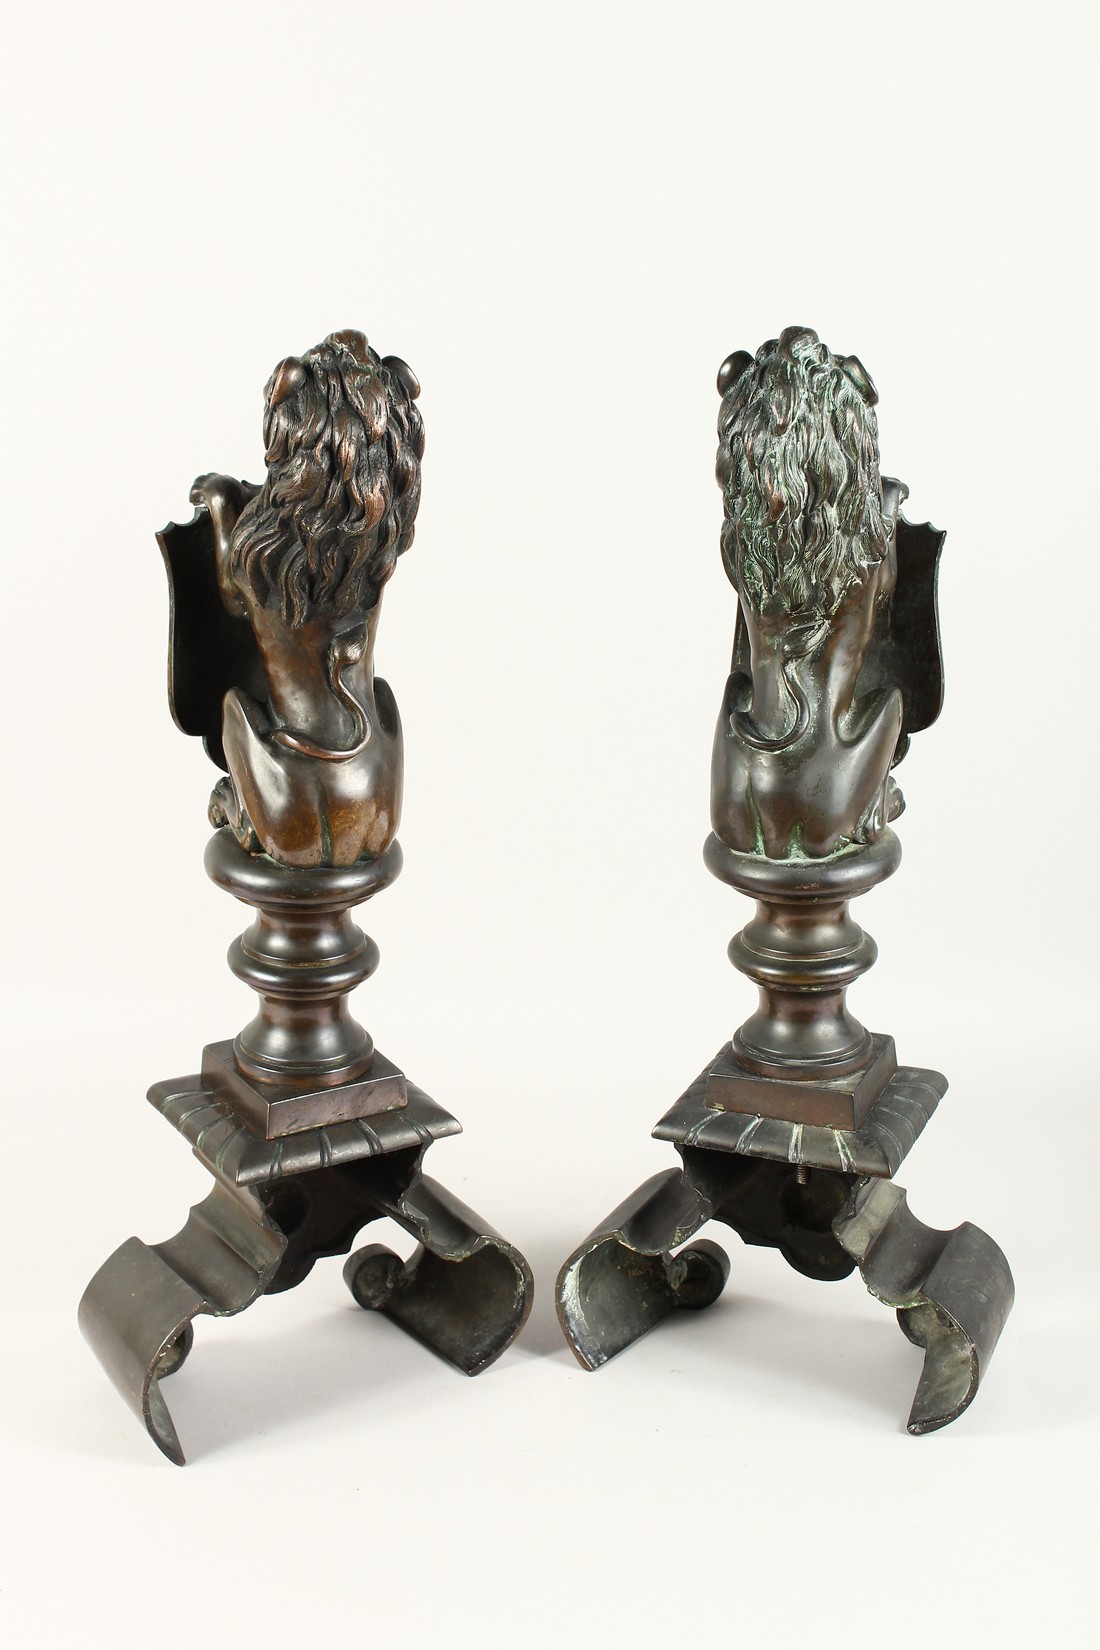 A SUPERB PAIR OF 19TH CENTURY BRONZE LION CHENETS holding a shield 23ins high. - Image 4 of 6